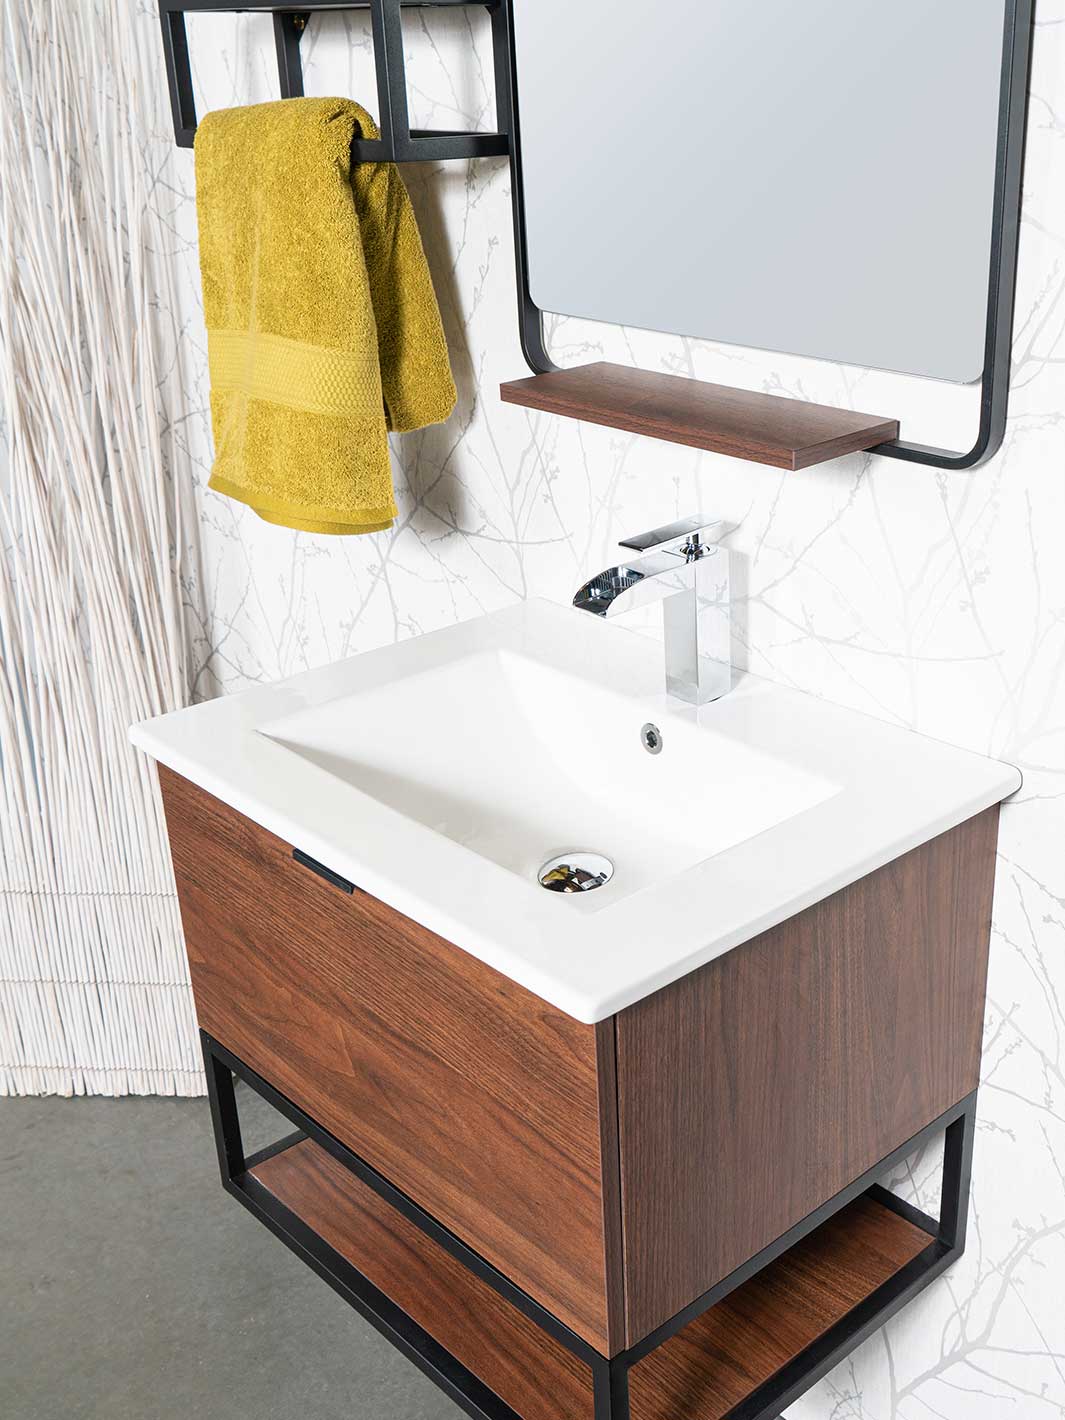 Floating style vanity with wood grain finish, white ceramic sink, and chrome faucet